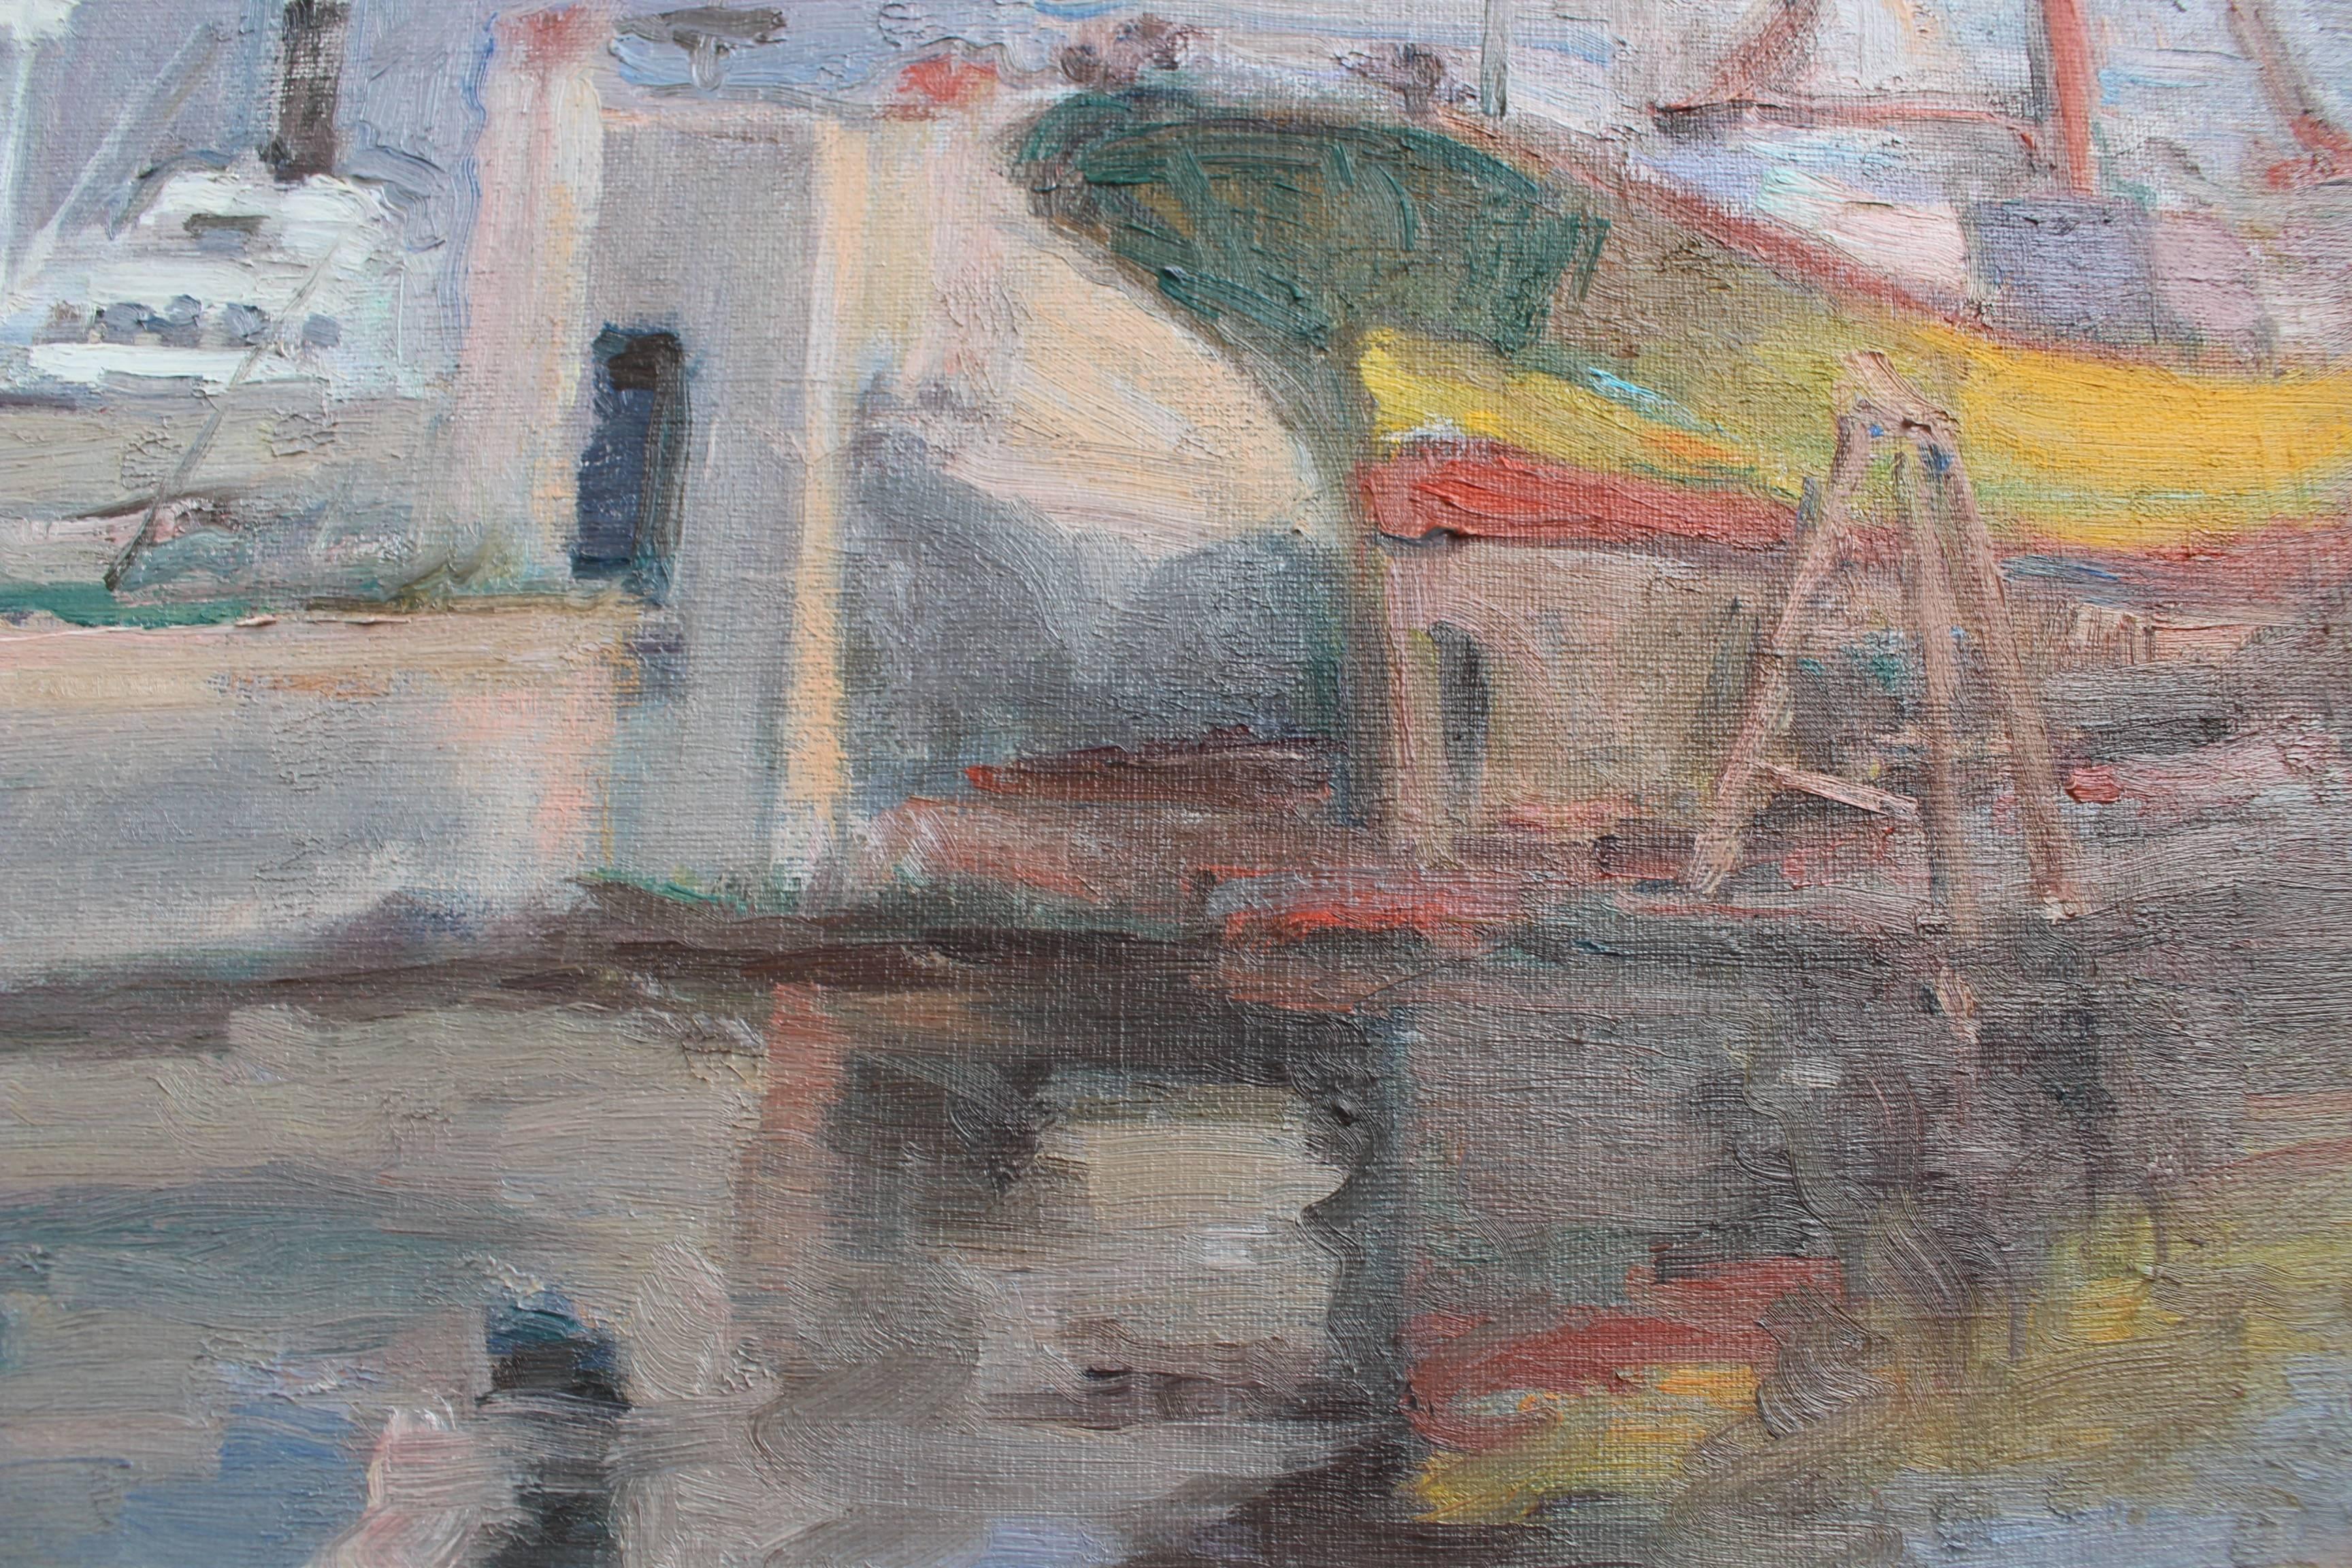 Mediterranean Port - Gray Figurative Painting by Pere Soulere Martí 